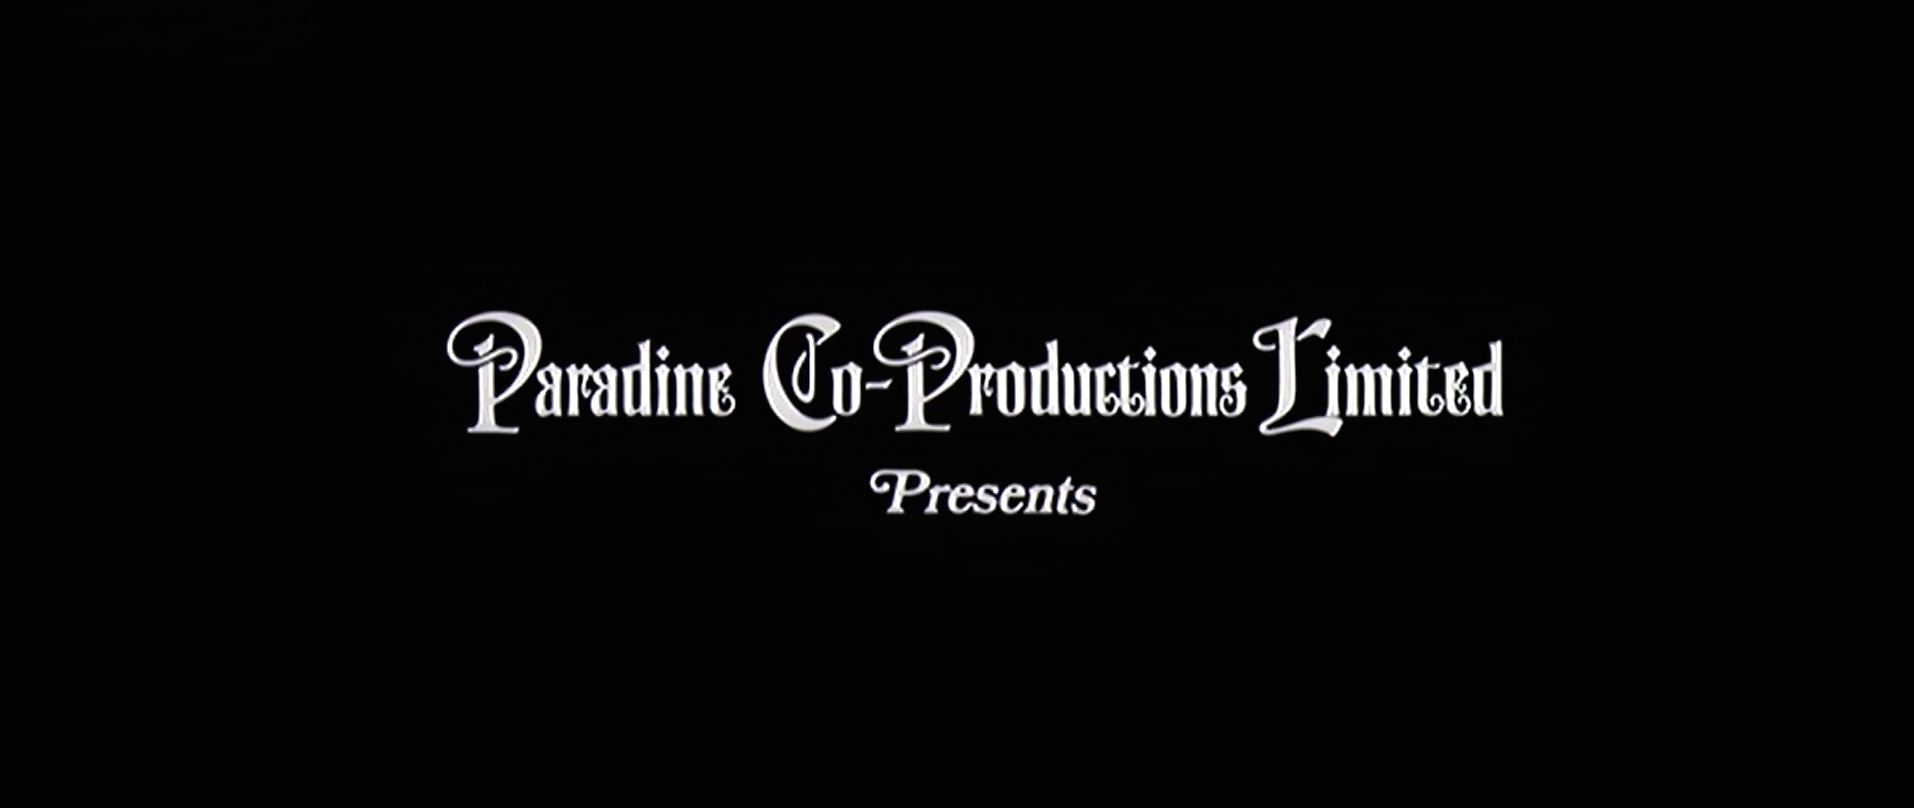 Main title from The Slipper and the Rose (1976) (2). Paradine Co-Productions Limited presents